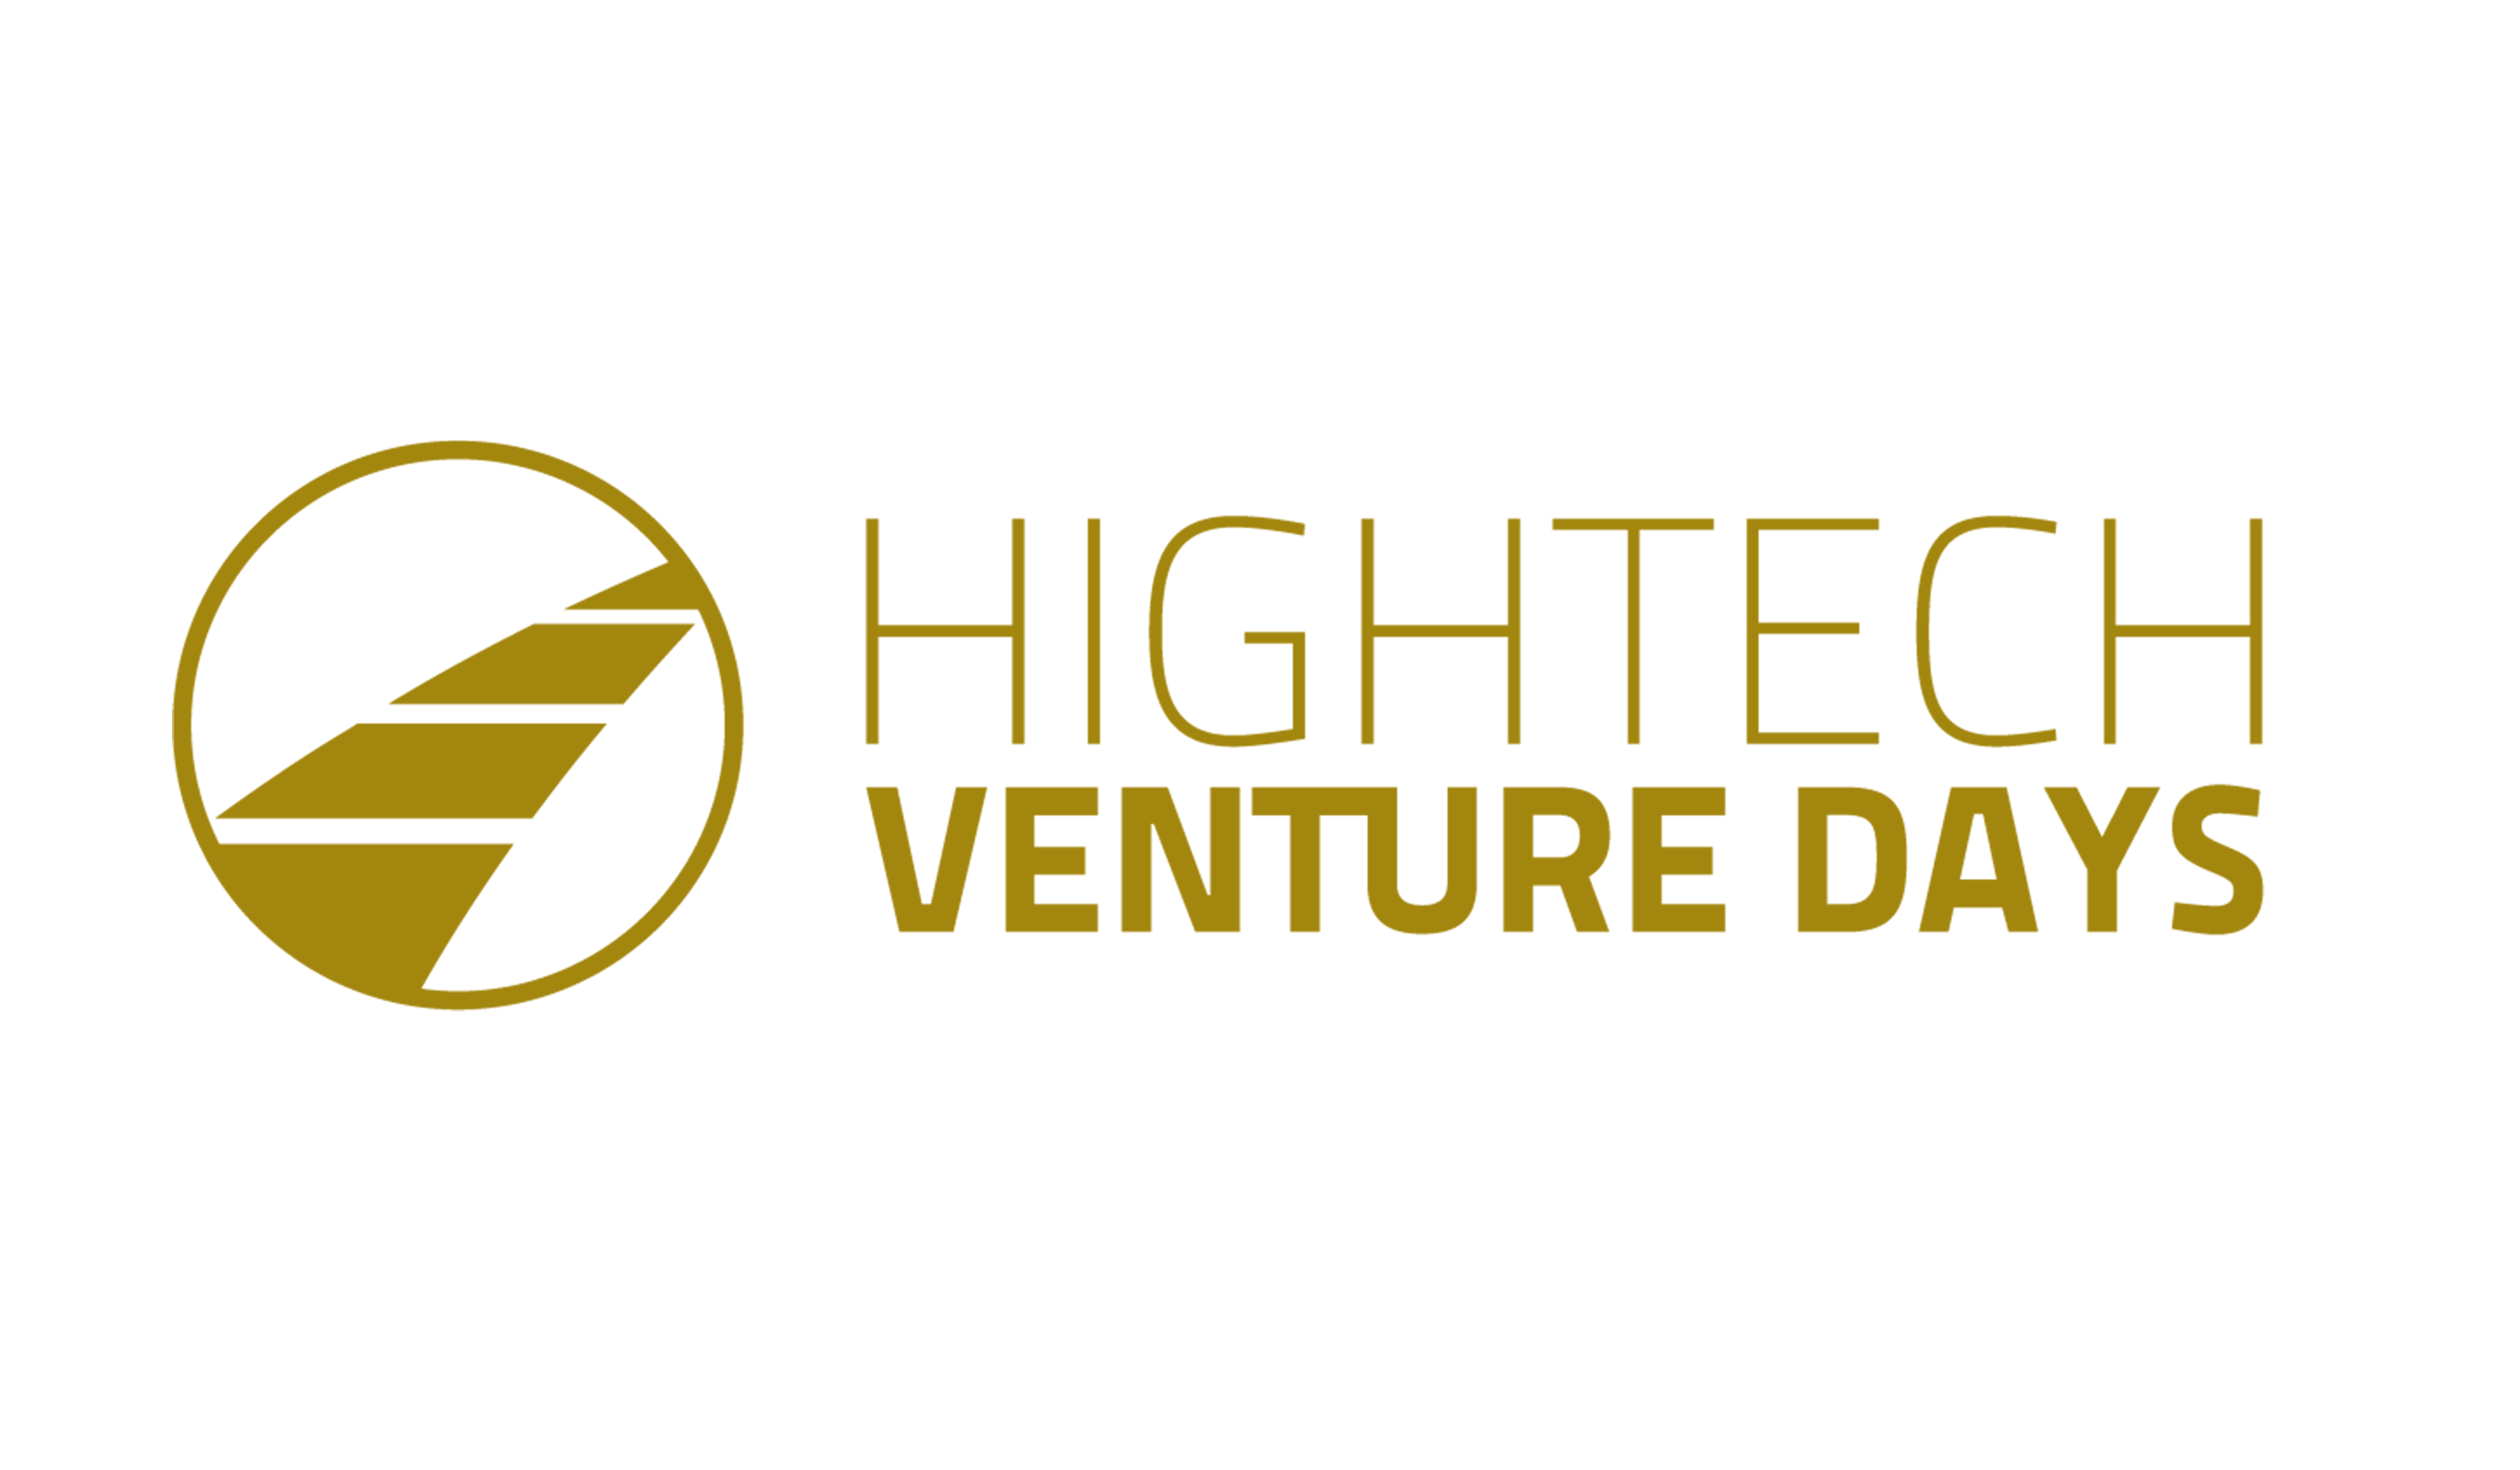 ENGIE at High Tech Ventures Days 2021